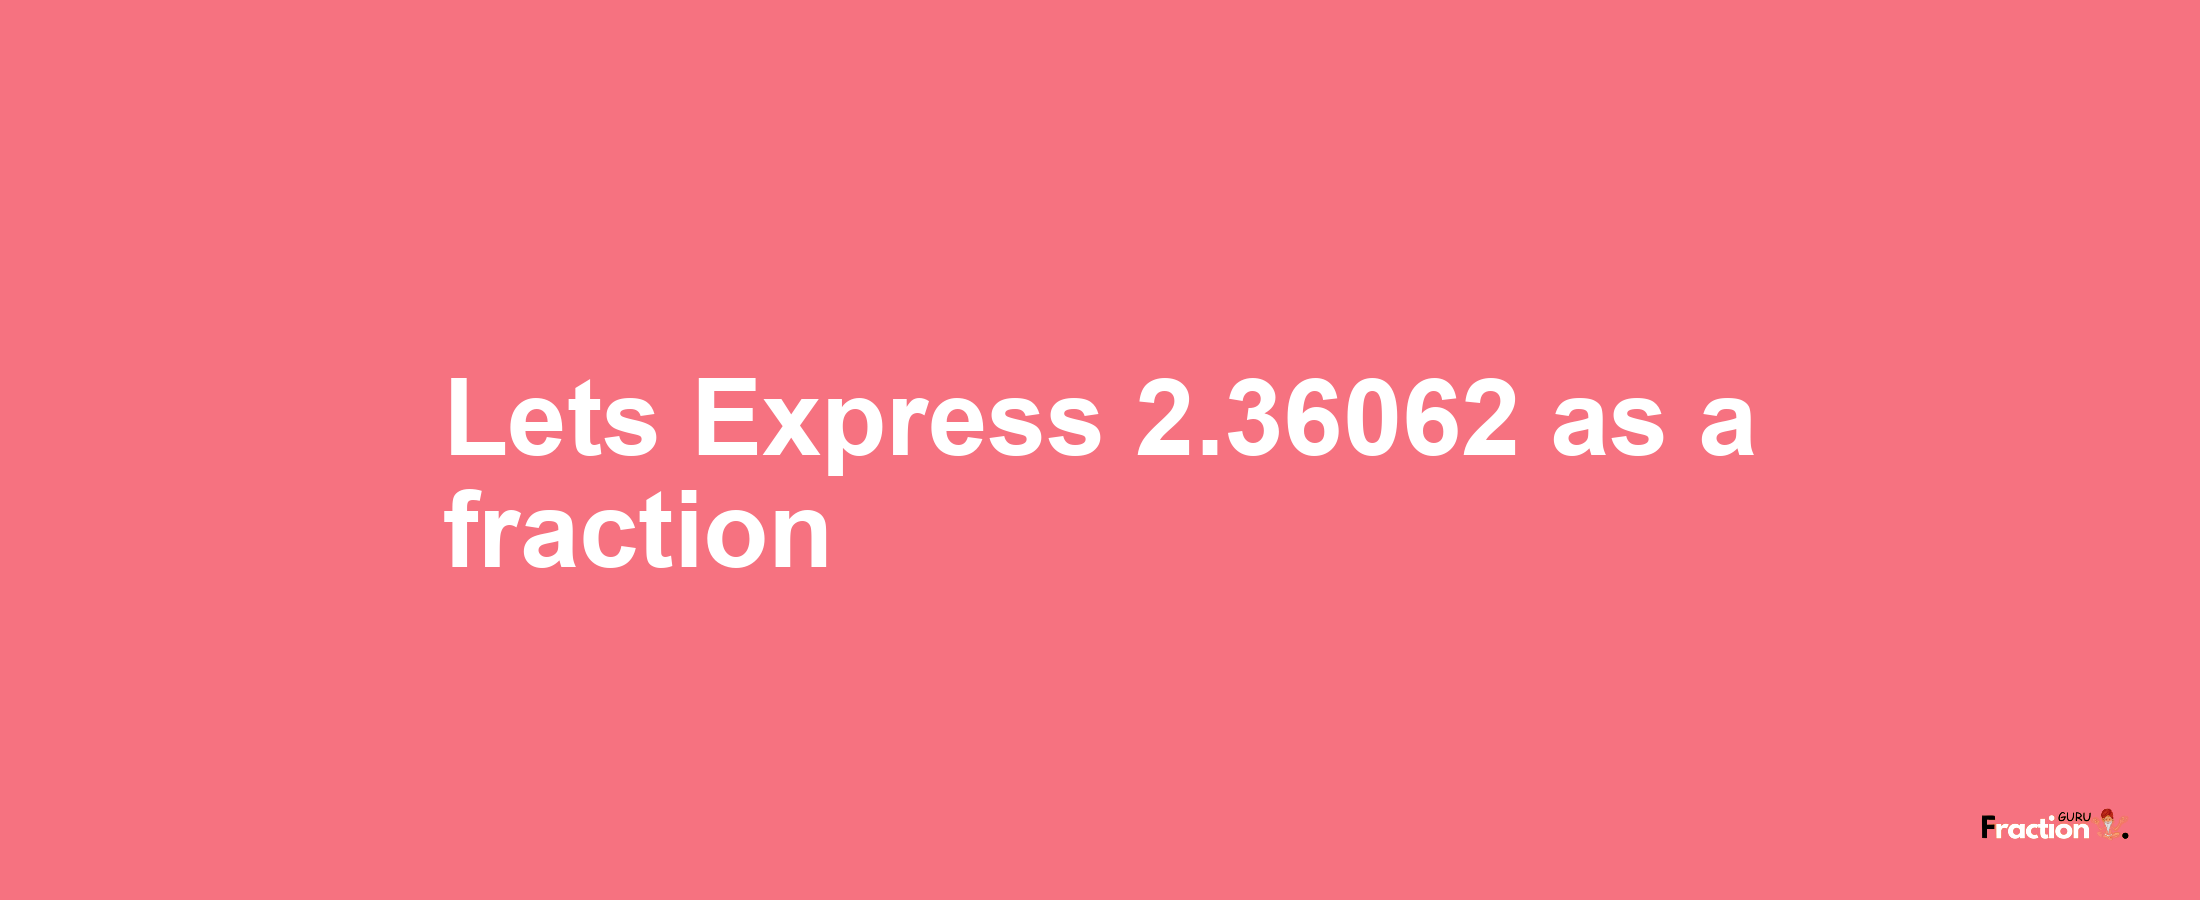 Lets Express 2.36062 as afraction